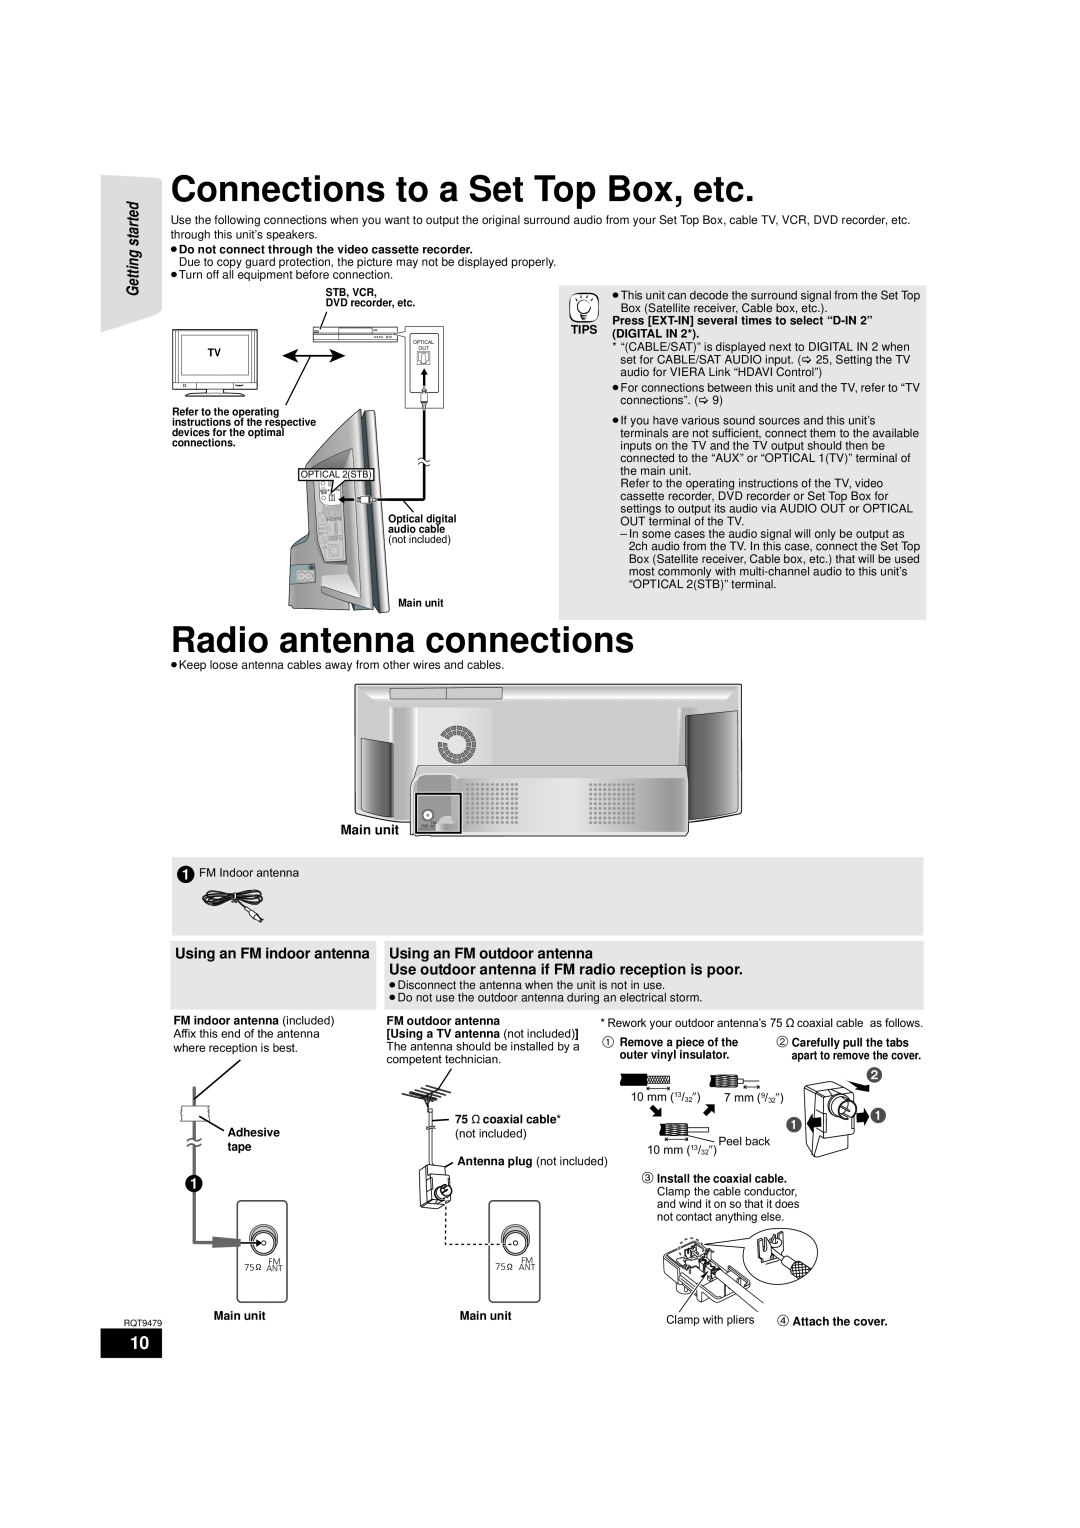 Panasonic SA-BTX70, SC-BTX70 Connections to a Set Top Box, etc, Radio antenna connections, Getting started, Main unit 